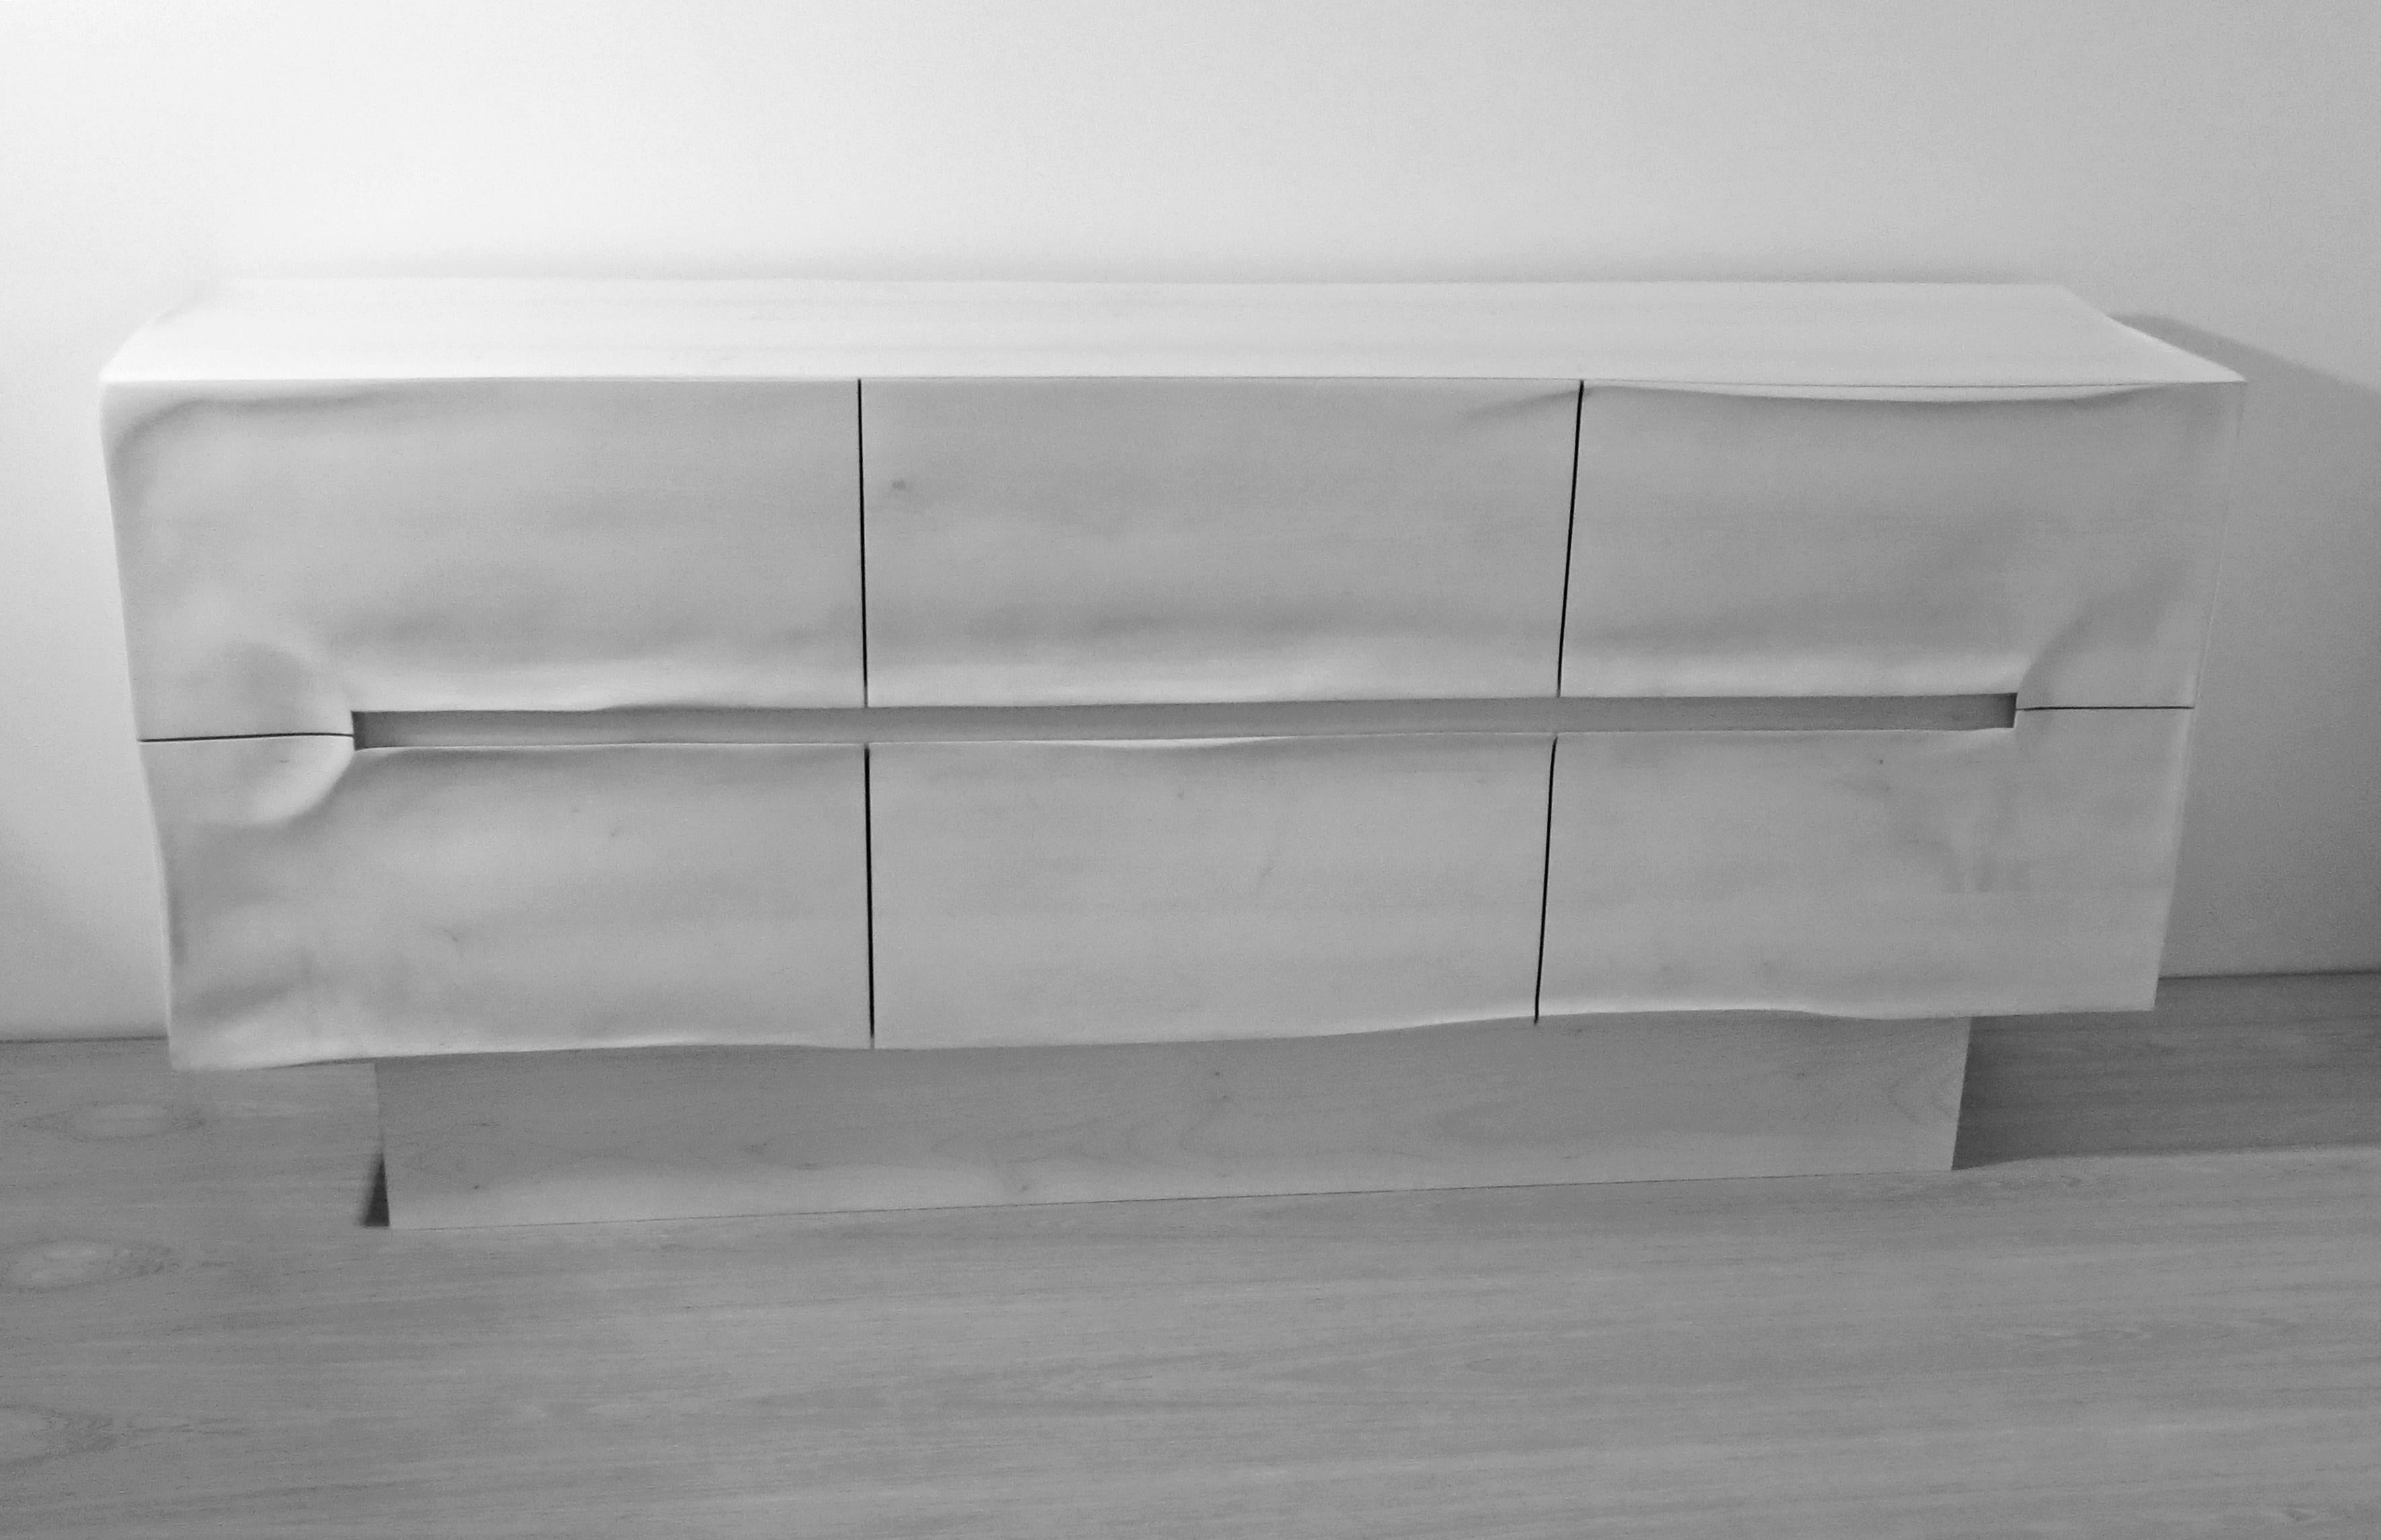 Sideboard Solid Wood, Organic Modern Design, Handcrafted in Germany, Sculptural For Sale 2